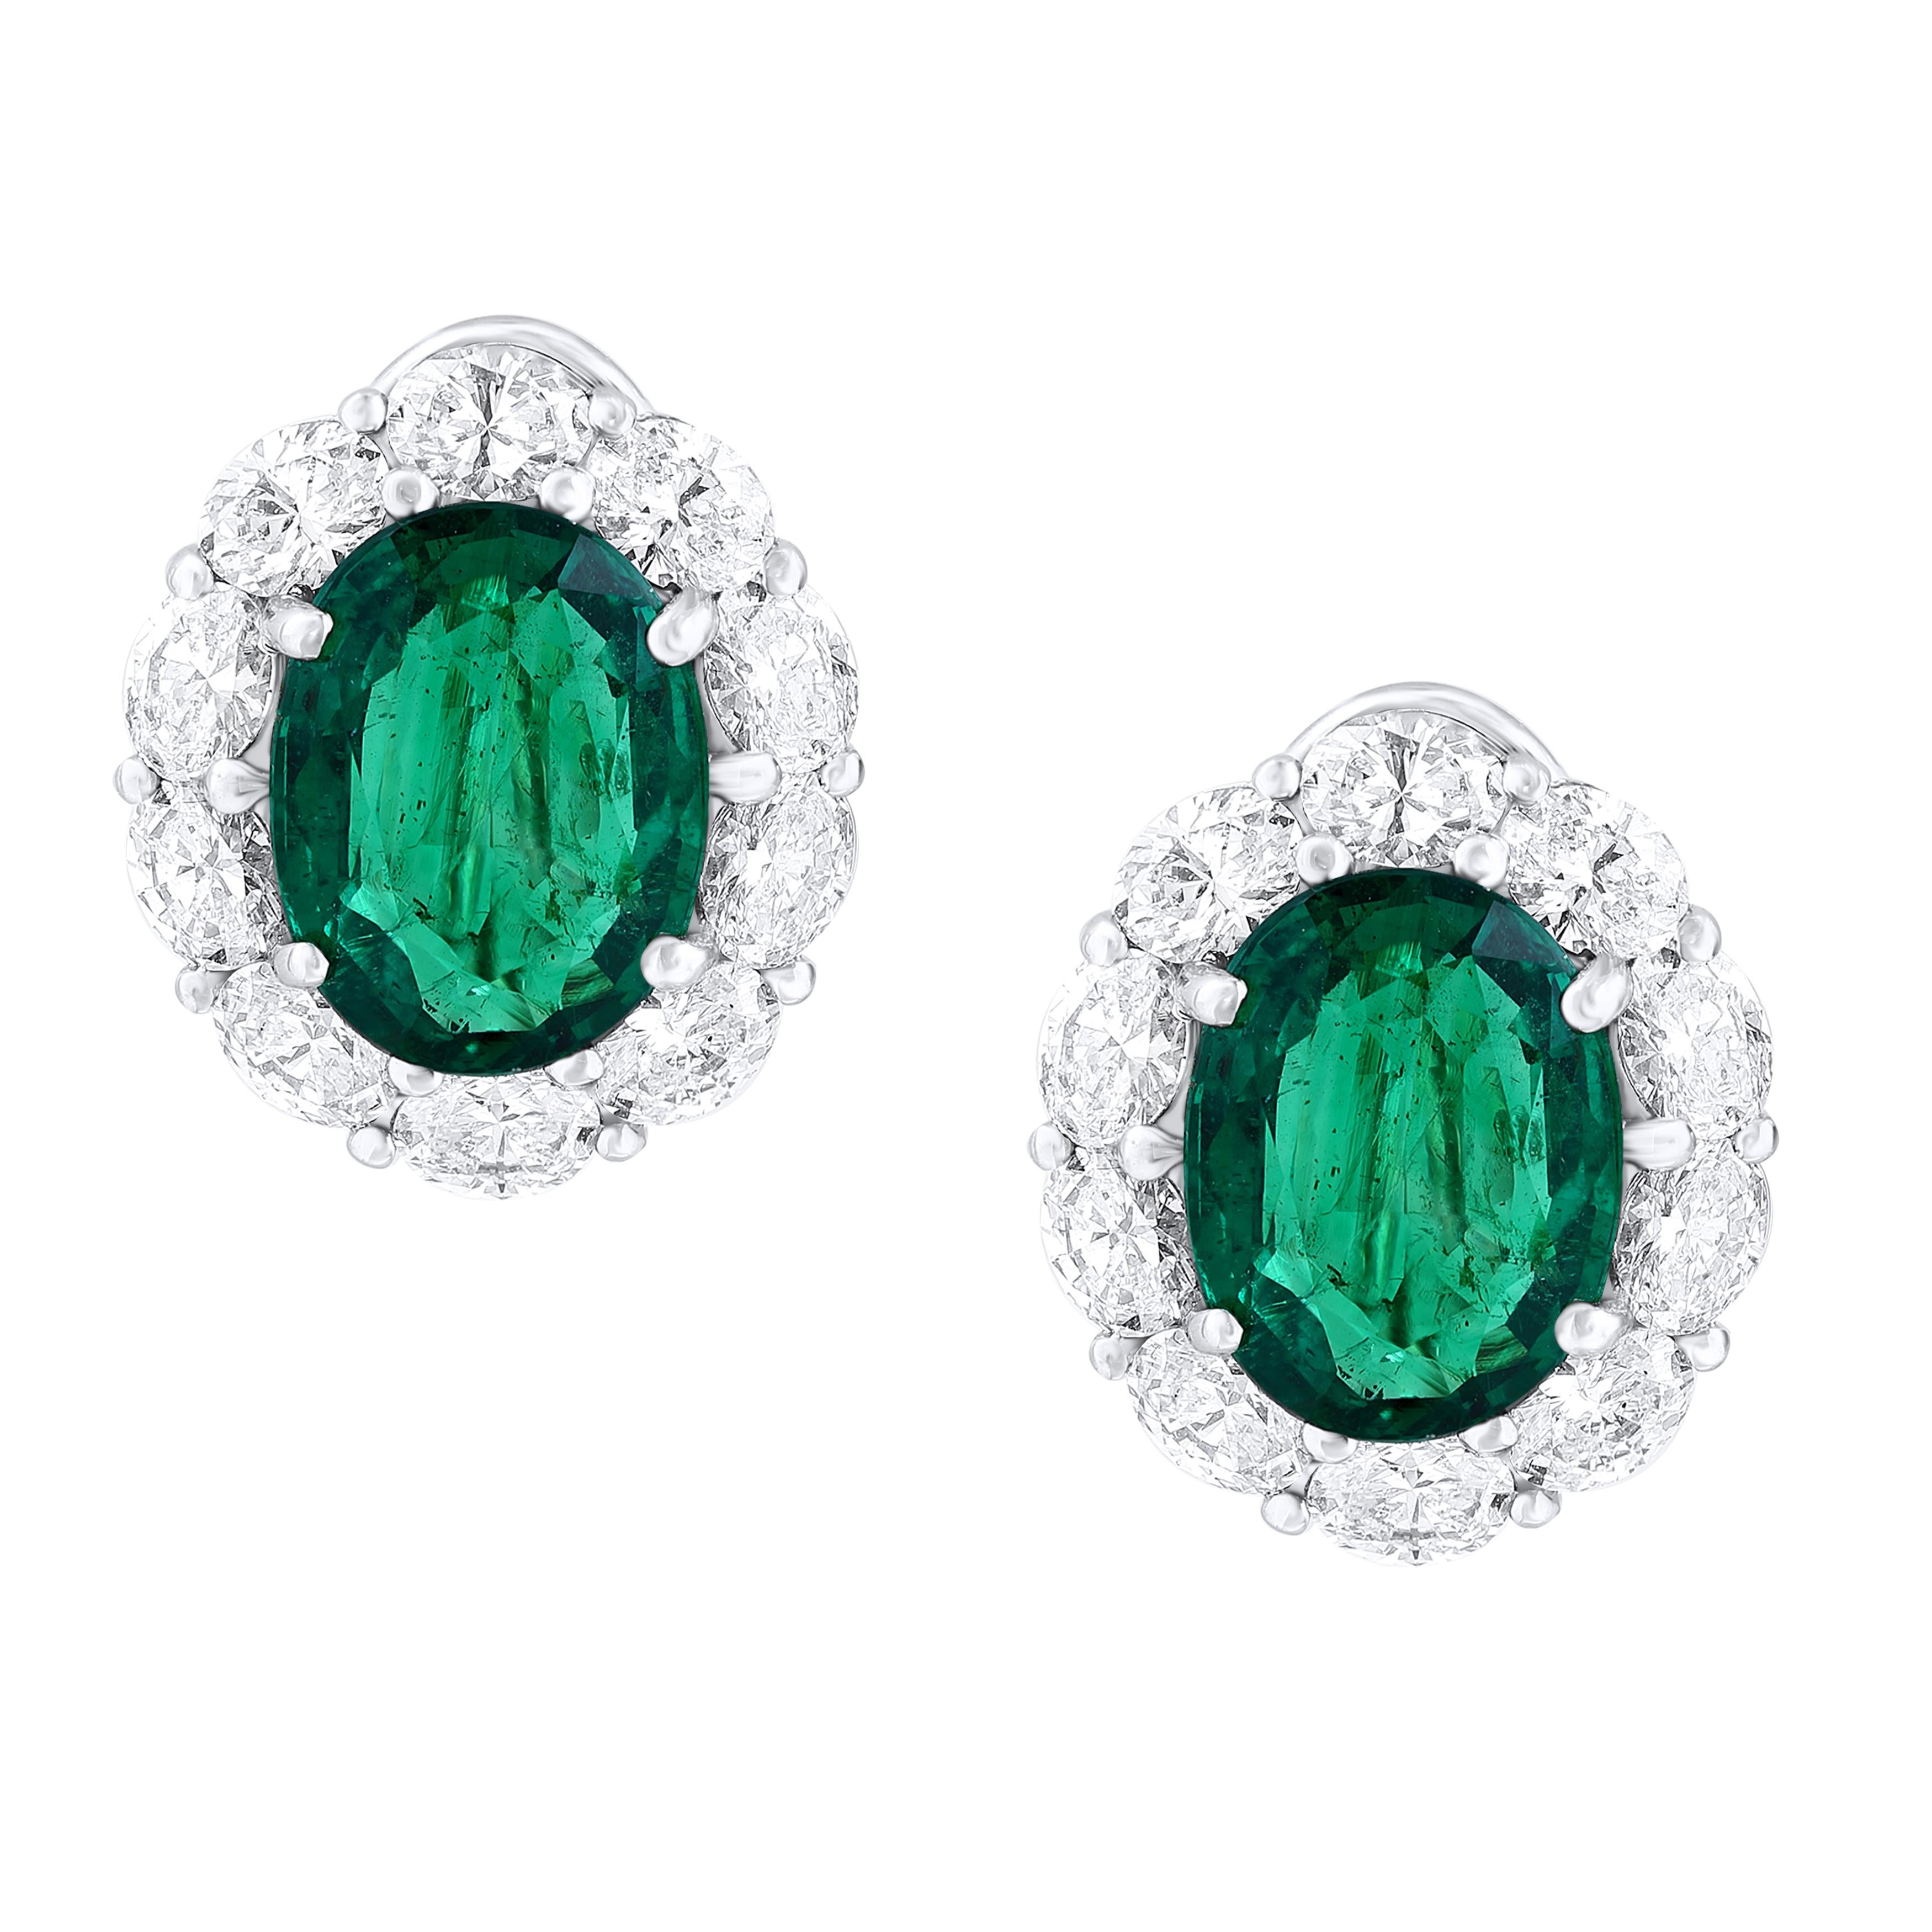 Showcasing two color-rich Certified oval cut Emeralds weighing 9.70 carats total, surrounded by a single row of oval cut brilliant diamonds. 20 Accent diamonds weigh 5.21 carats total. Set in 18 karats white gold. Omega Clip with the post.

Style